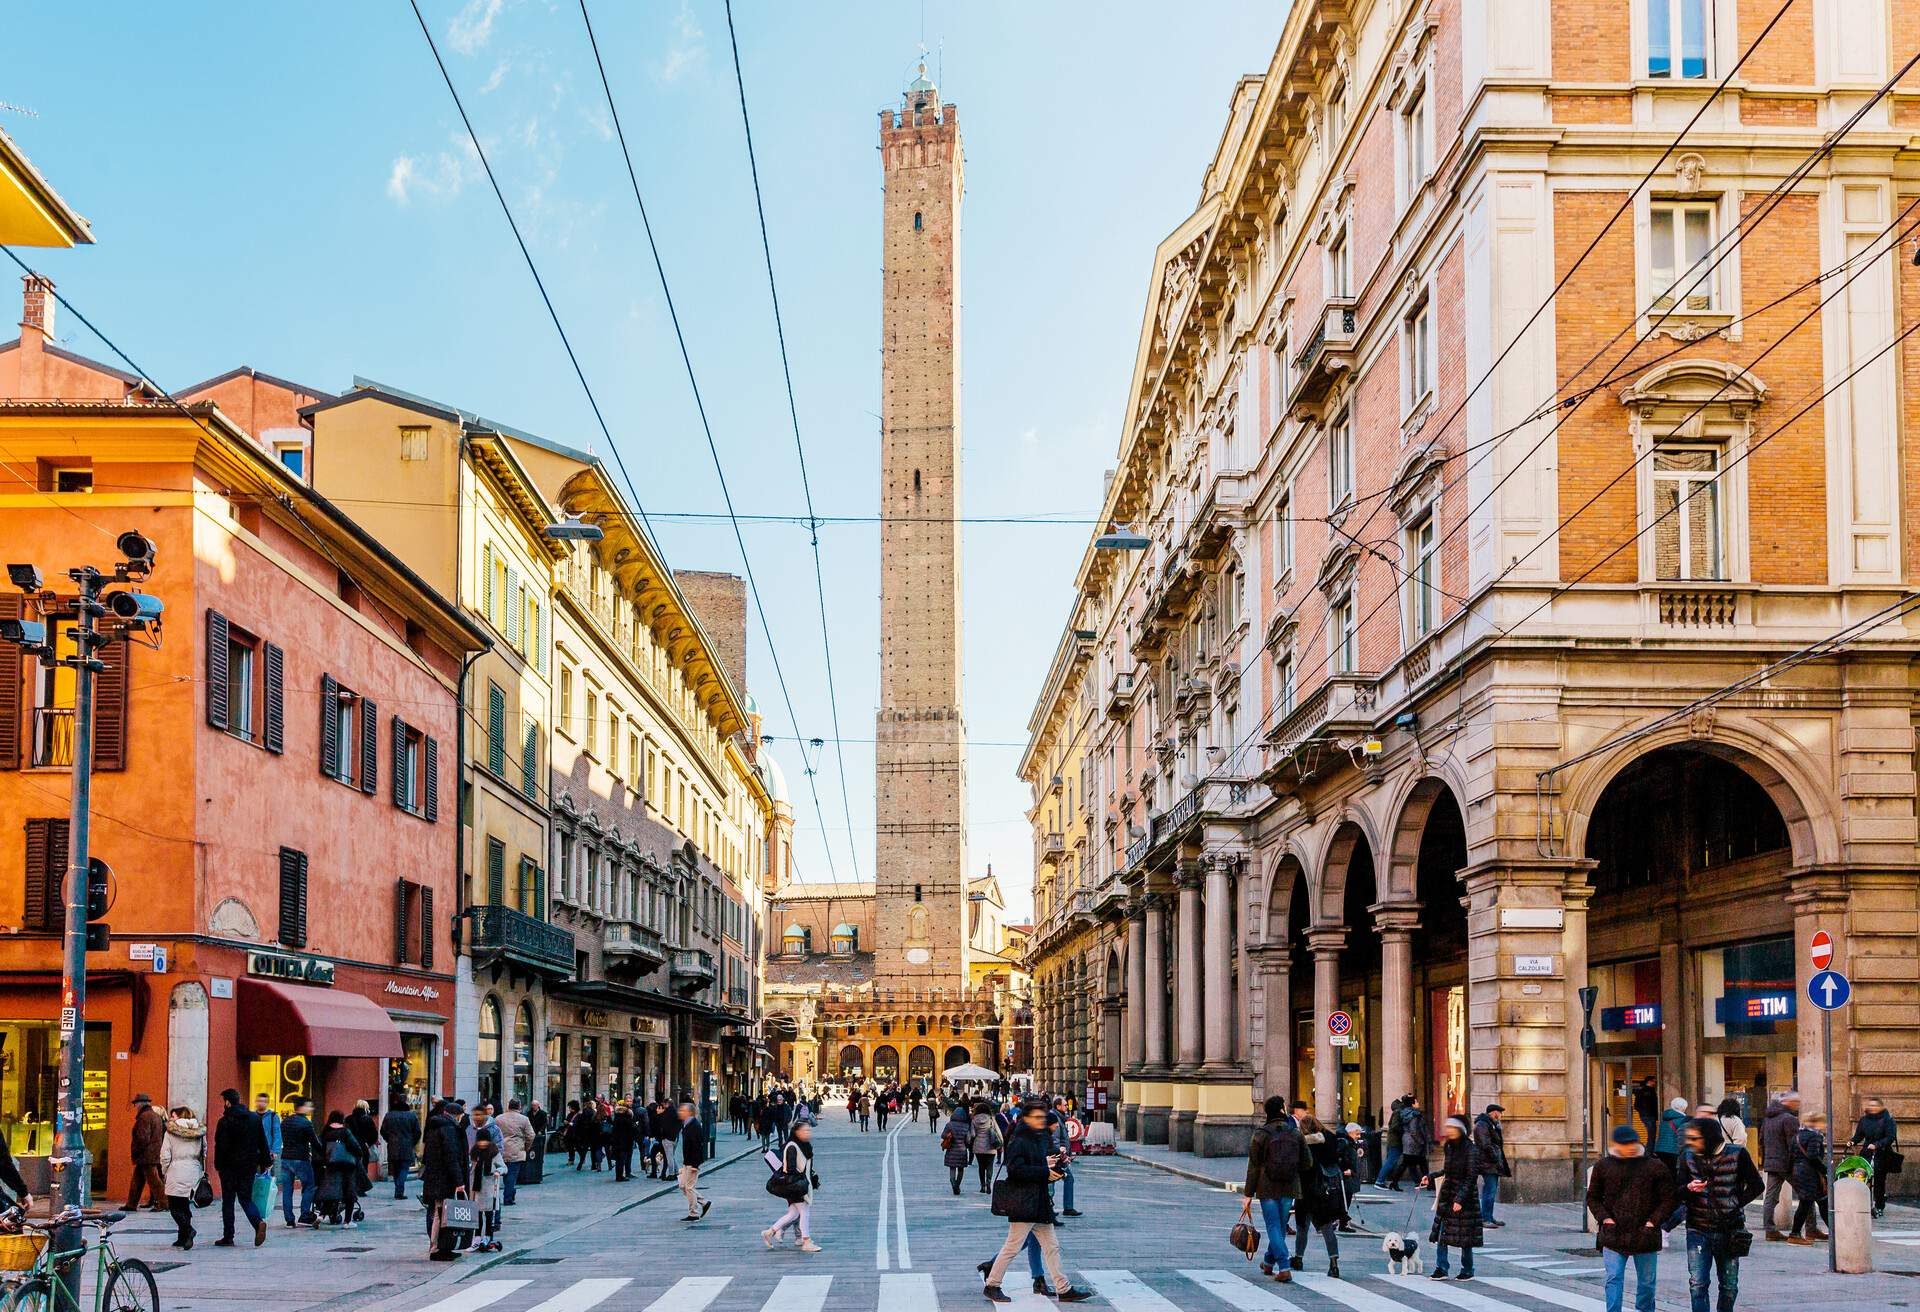 DEST_ITALY_BOLOGNA_ASINELLI-TOWER_GettyImages-1174887910